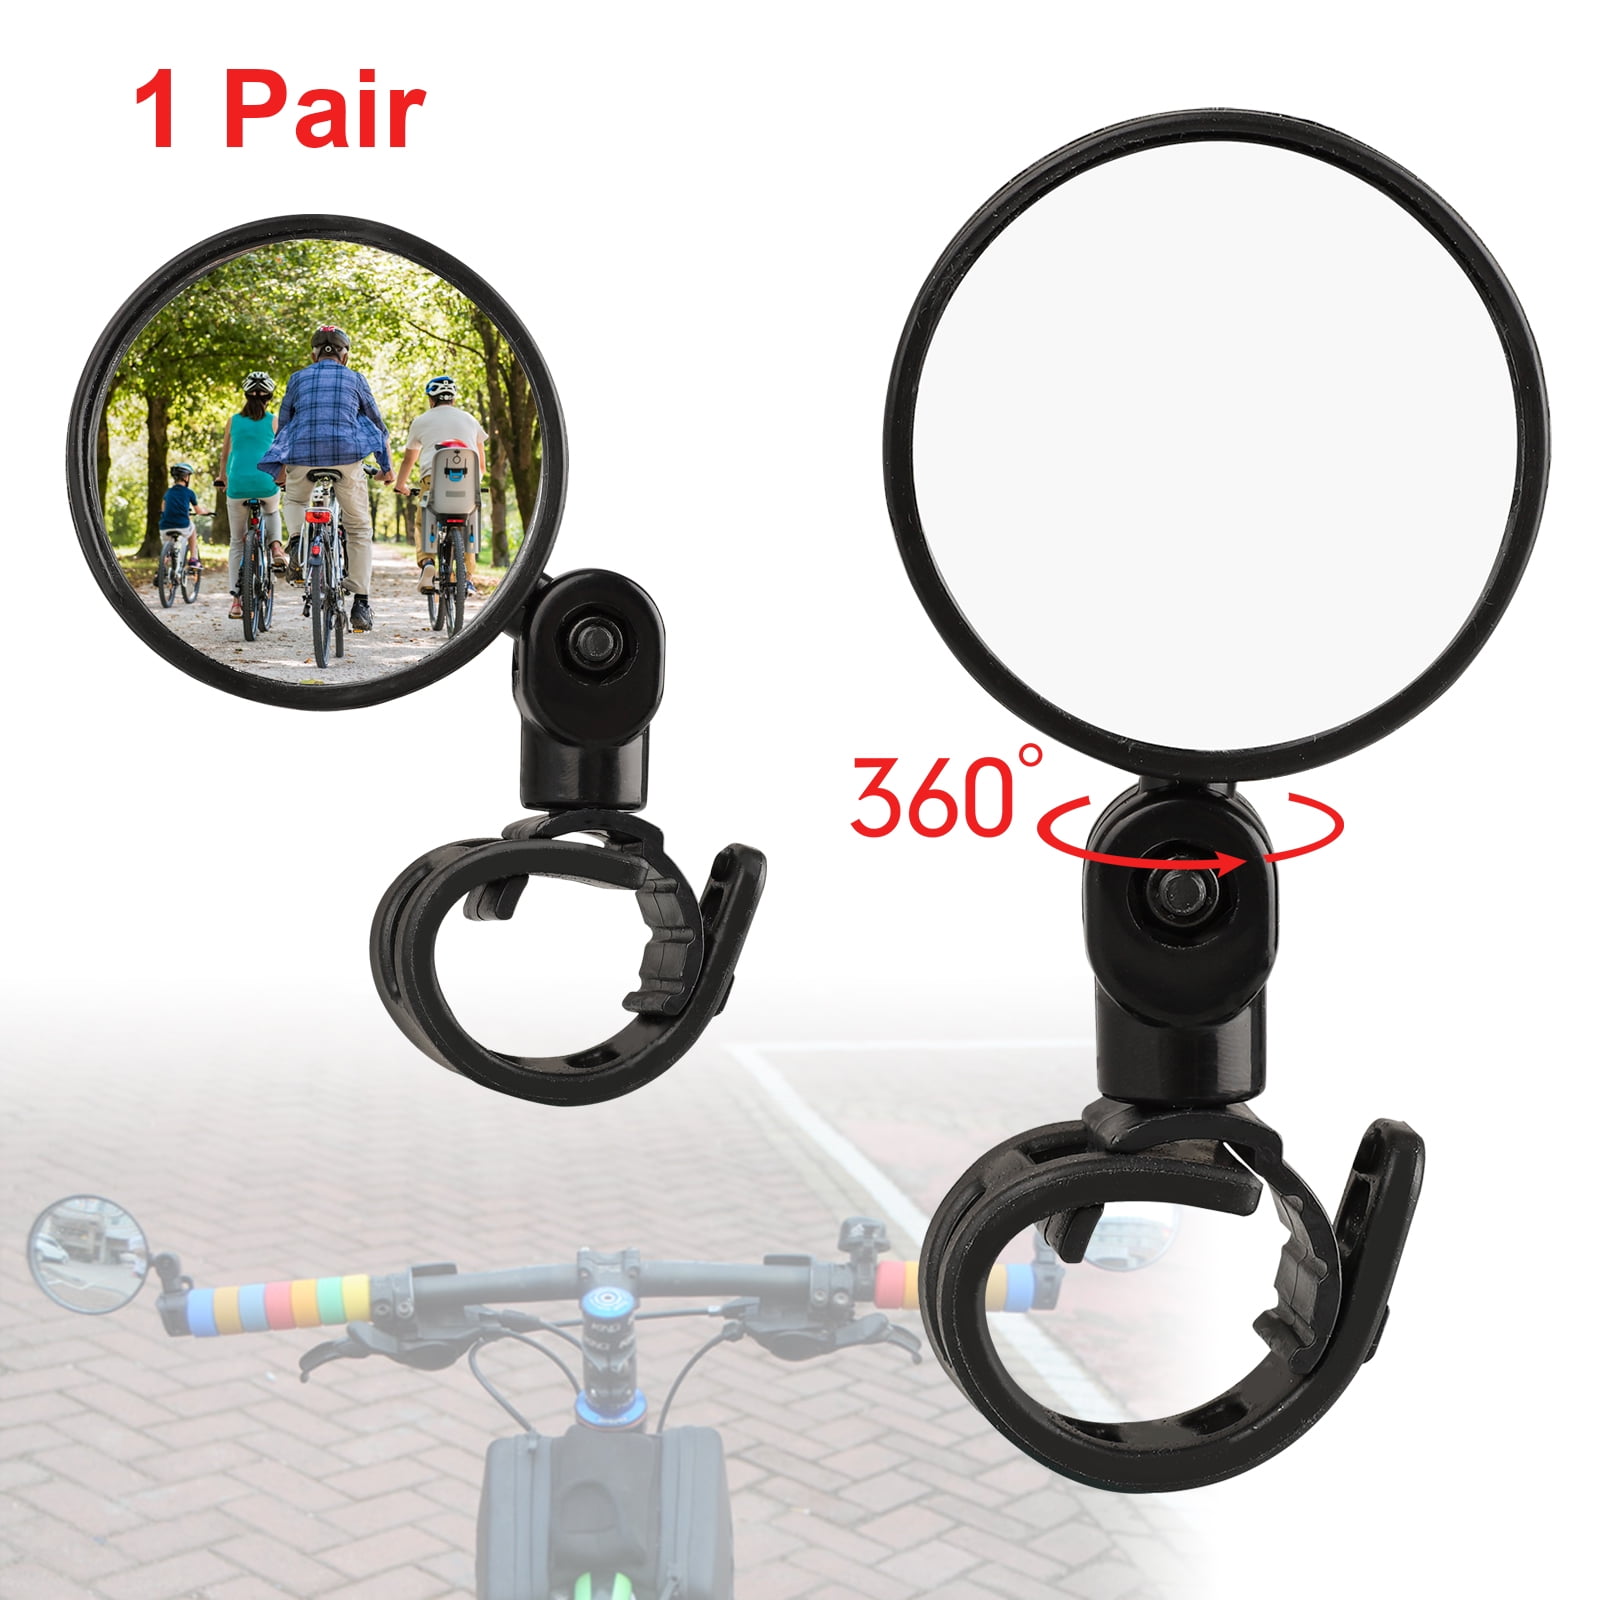 Details about   Bell SMARTVIEW 300 WIDE ANGLE MIRROR  BIKE BICYCLE BRAND NEW